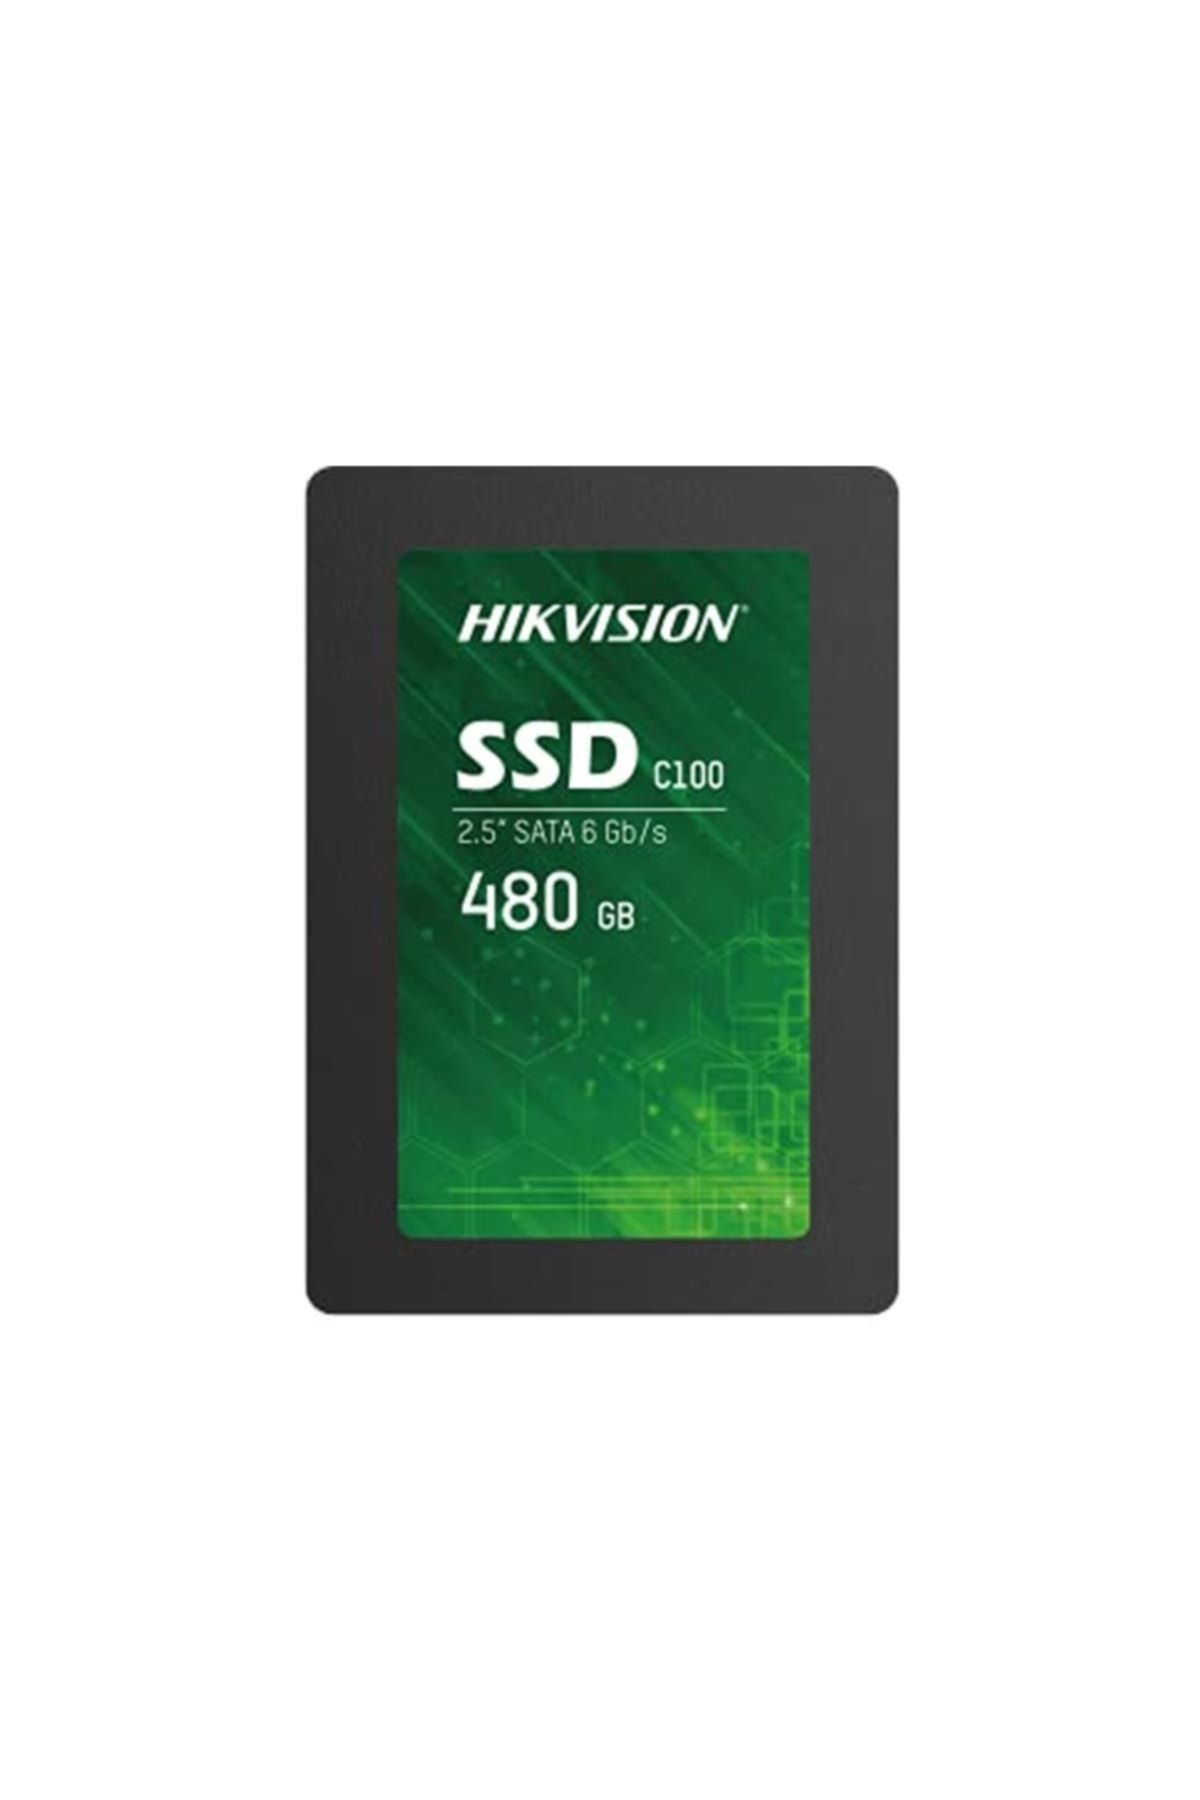 Hikvision Marka: Ssd C100/480 Gb 2.5" Solid State Disk, 480 Gb, Siyah Kategori: Ssd (solid State Dr